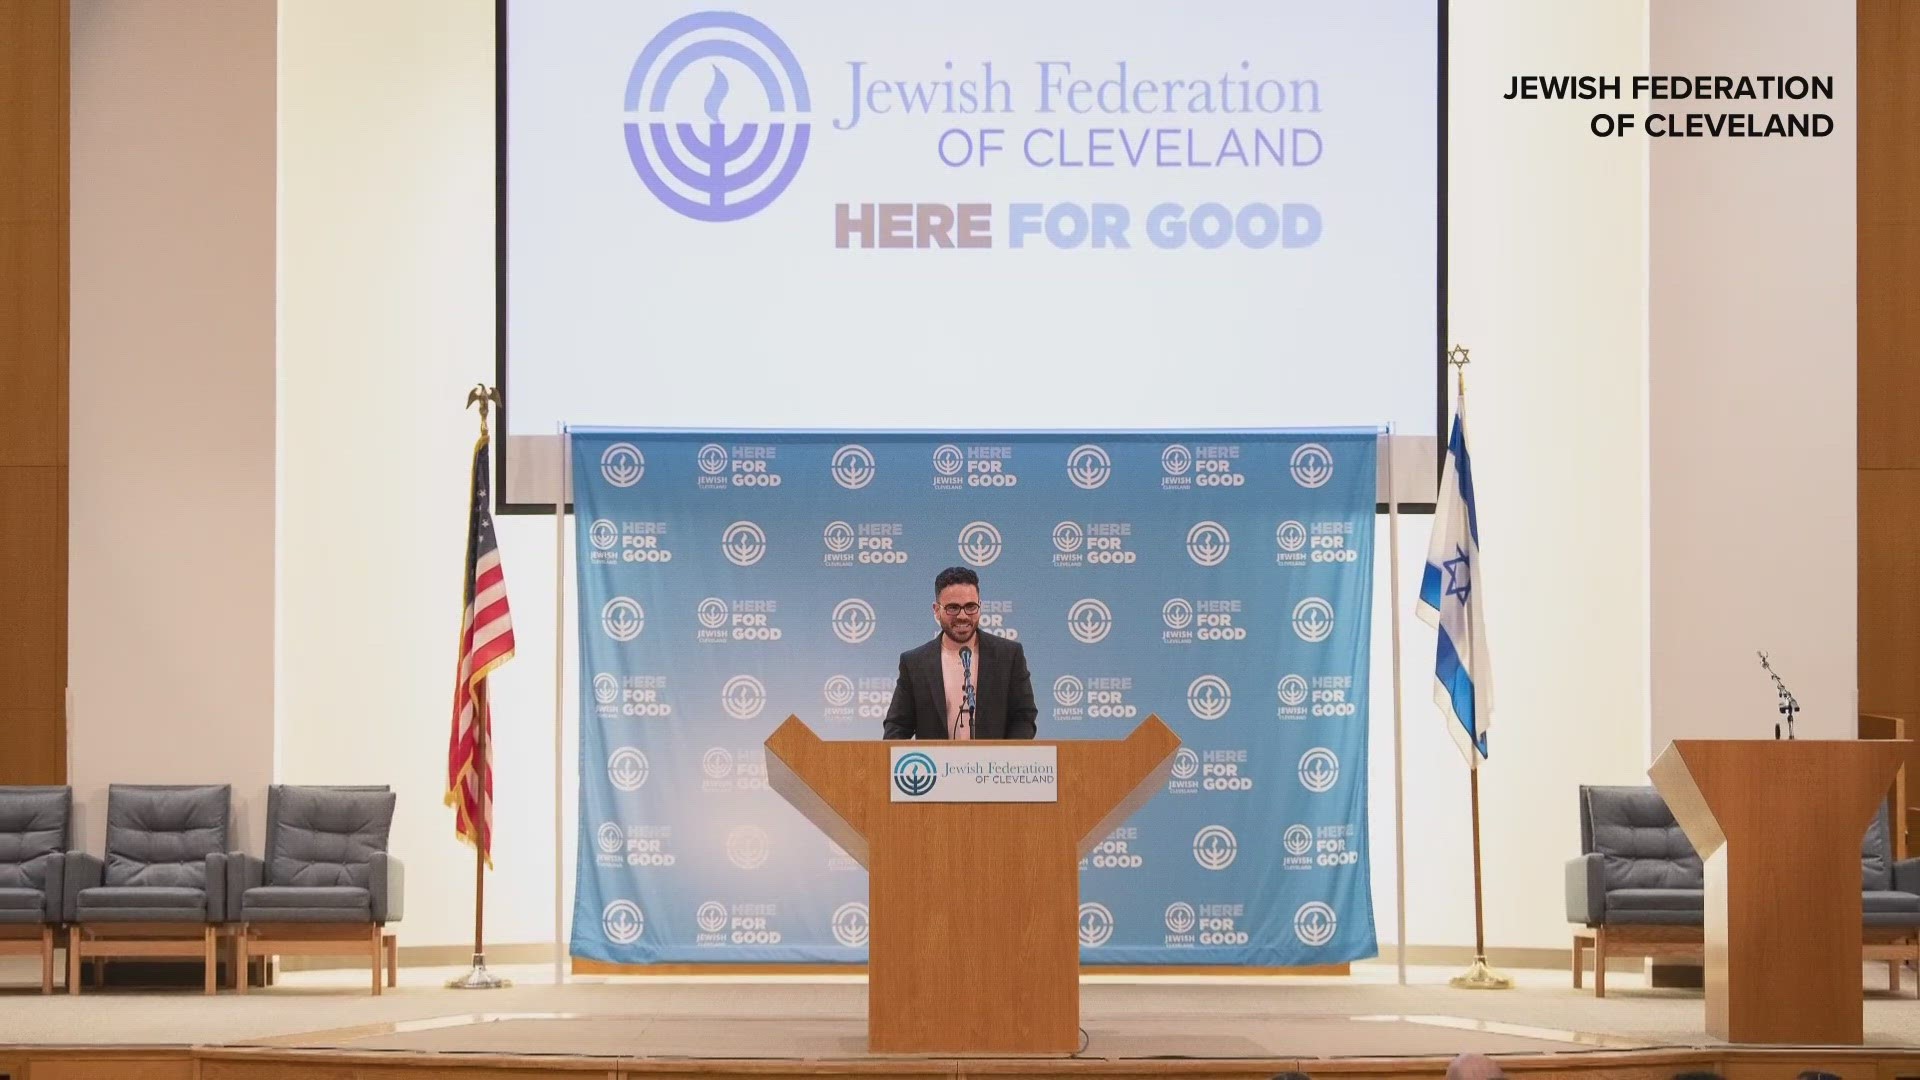 Organizations like the Kol Israel Foundation and Jewish Federation of Cleveland have recently hosted events focusing on fighting antisemitism.